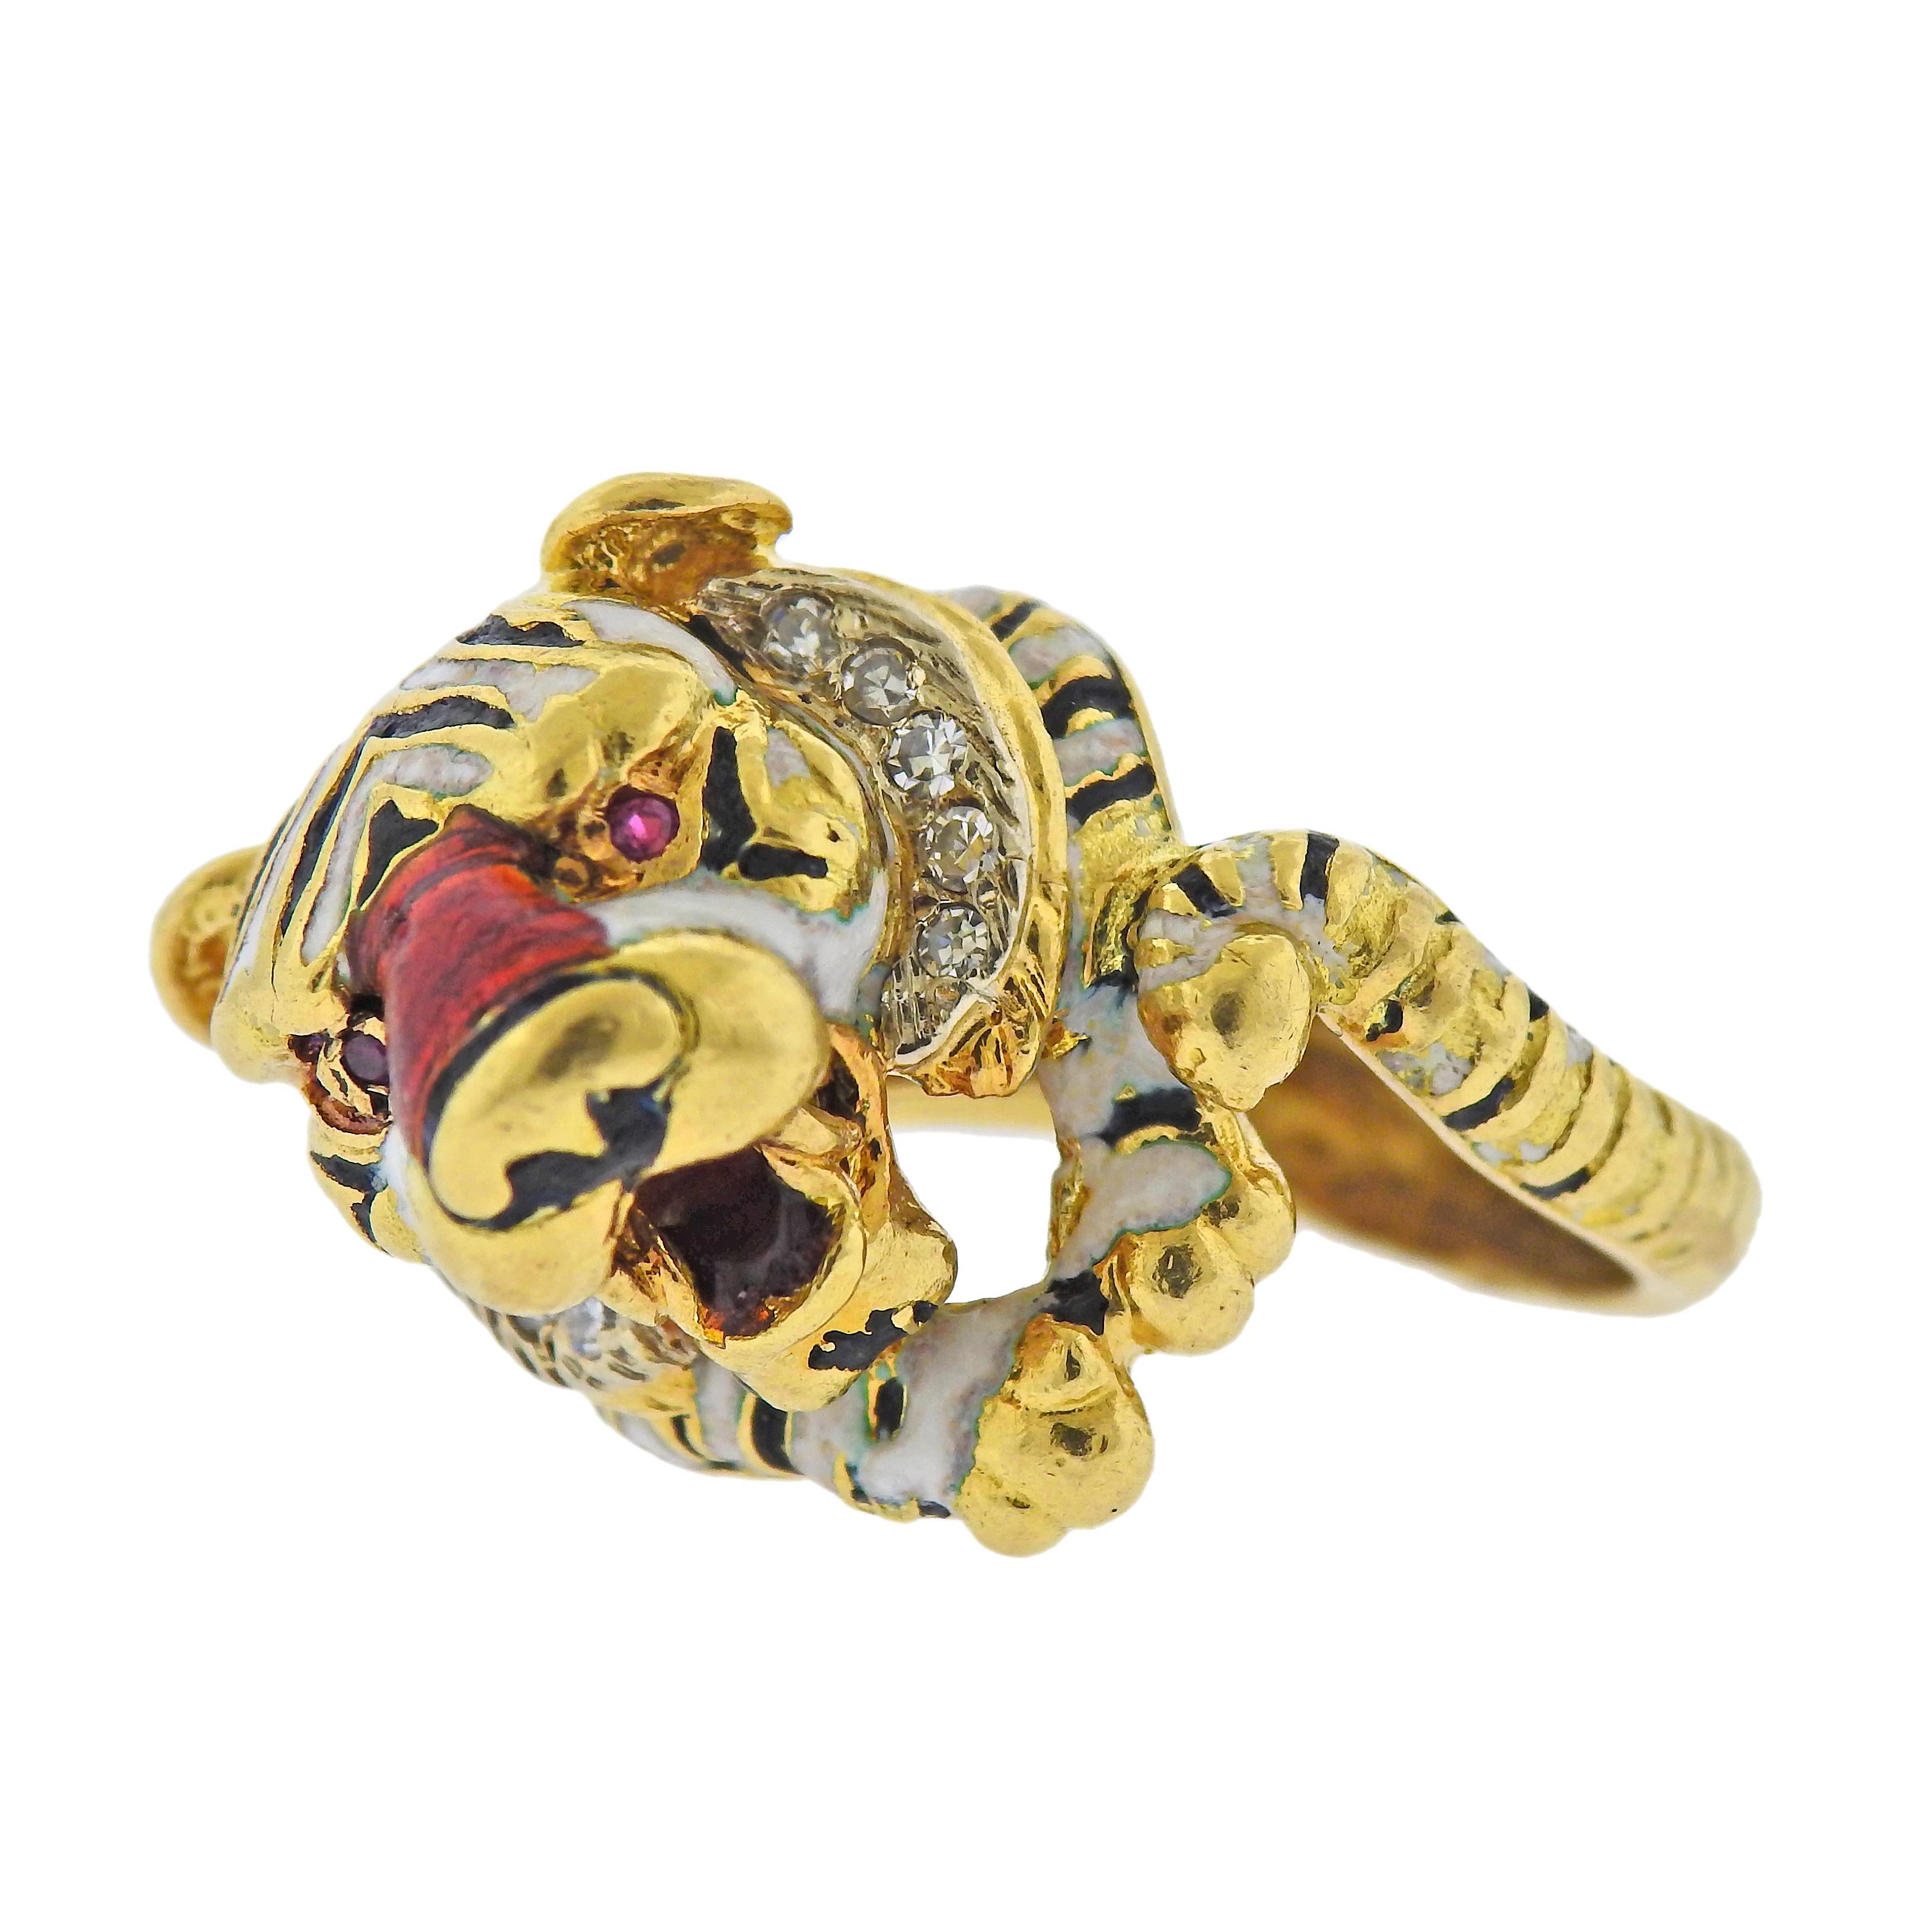 18k gold tiger ring by Frascarolo, decorated with diamonds, ruby eyes and enamel (some loss is present). Ring size - 4.5, ring top - 17mm x 20mm. Marked: FC mark, made in Italy, Modele Depose, 750. Weight - 17.7 grams. 